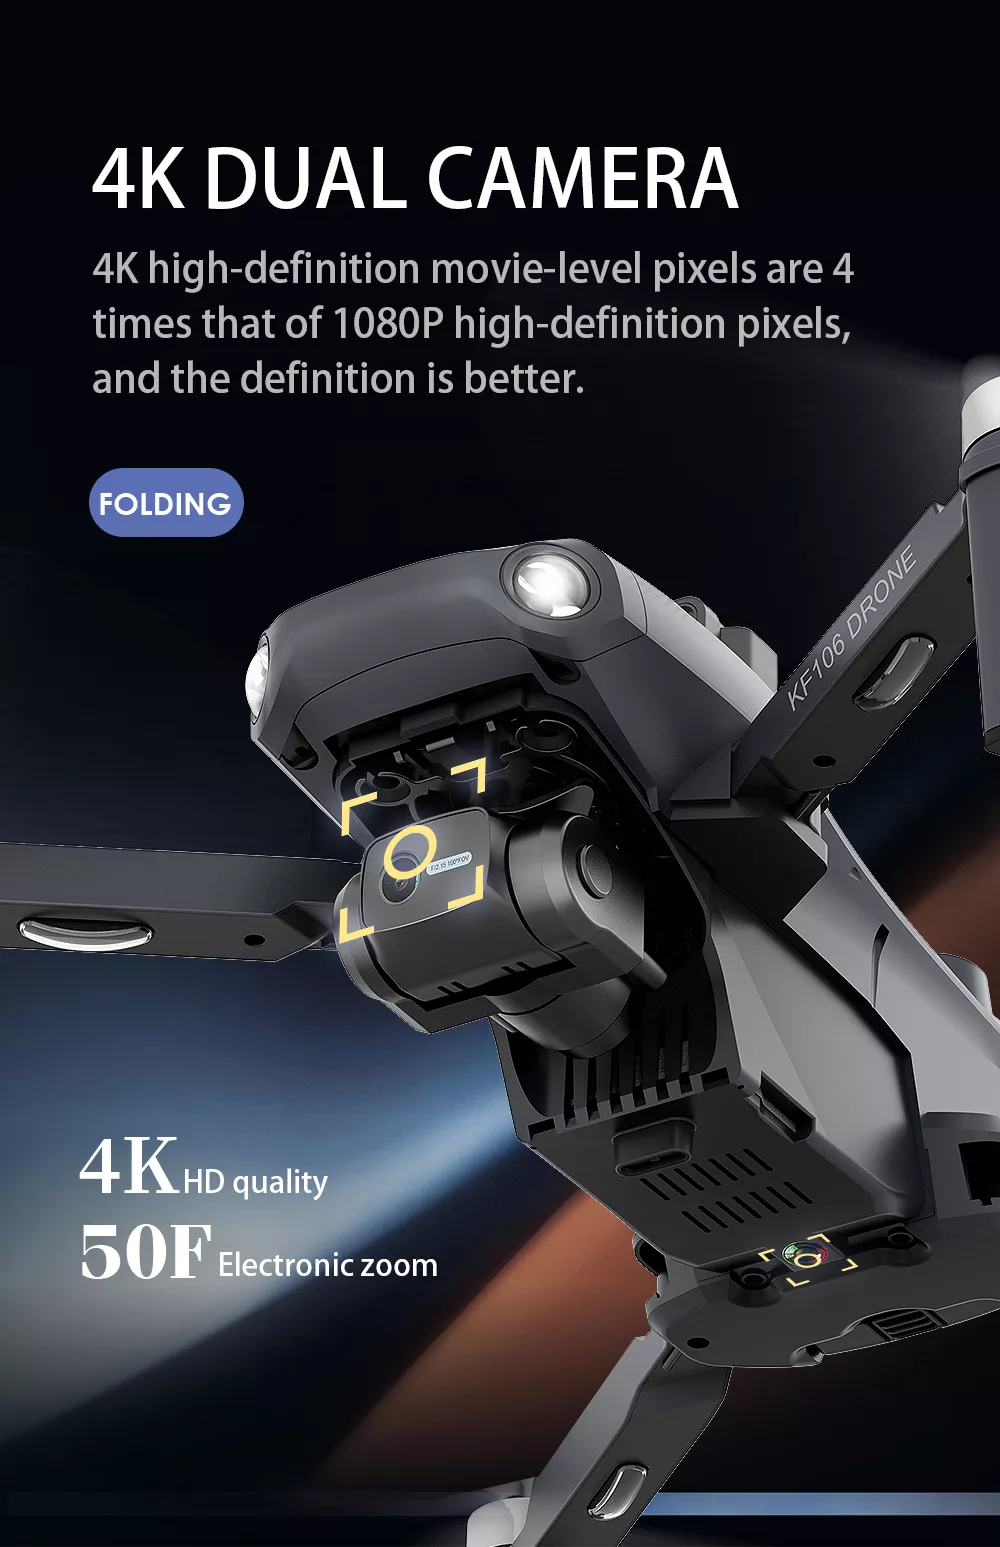 iSKF106 Max 4K Drone | 3-Axis Gimbal - ISPEKTRUM Toys & Games